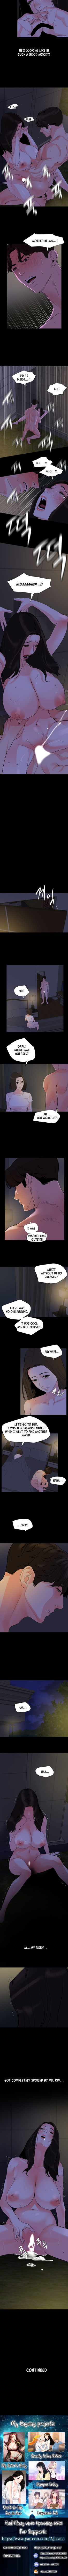 Don’t Be Like This! Son-In-Law - Chapter 30 Page 3